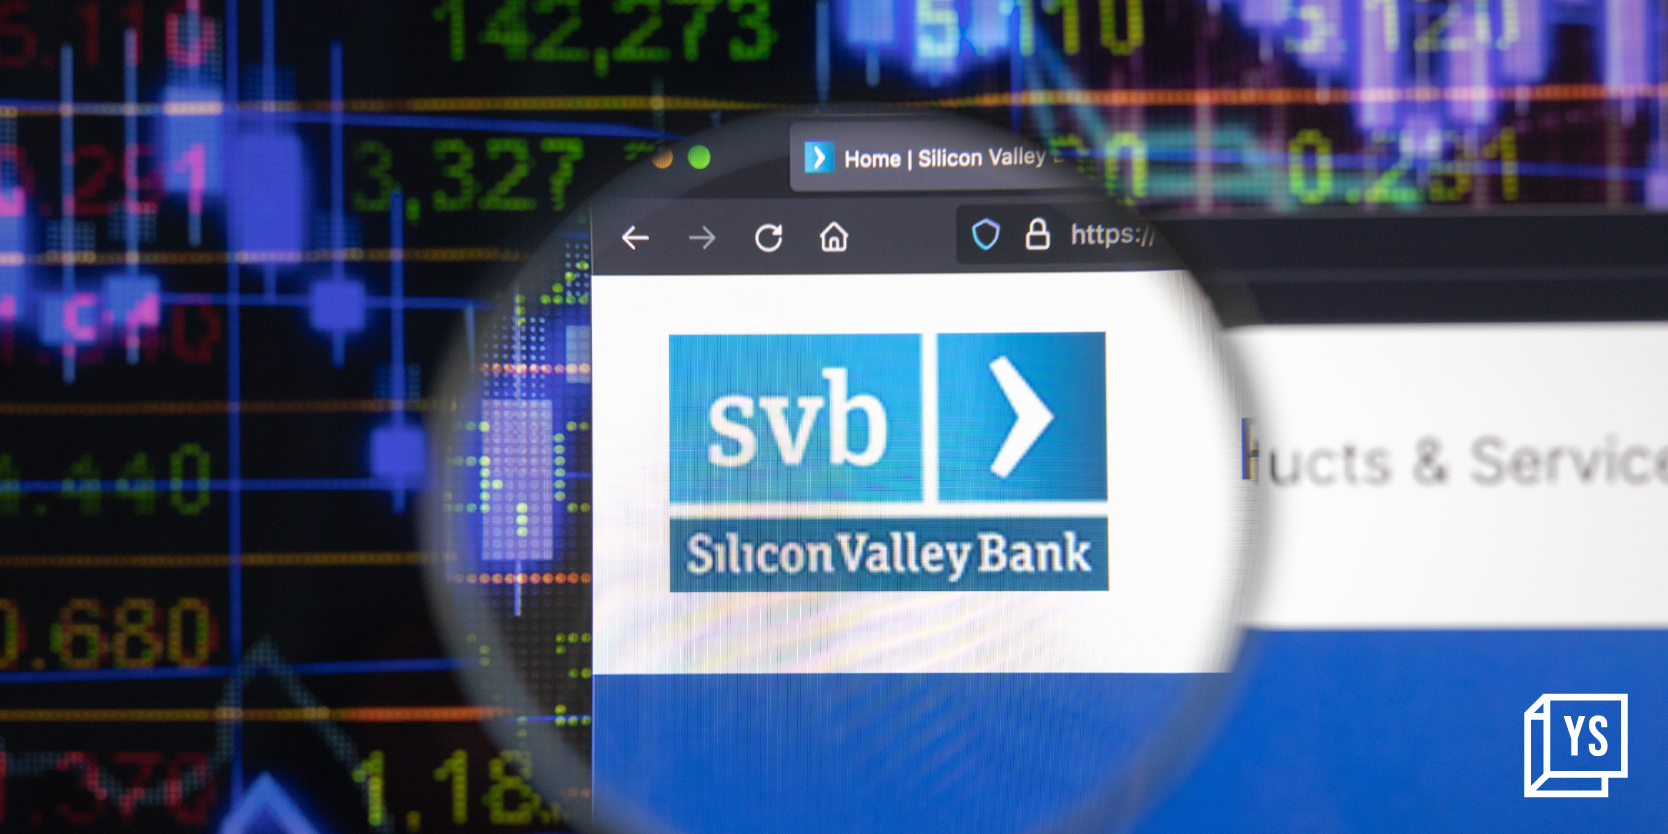 What happened with Silicon Valley Bank?